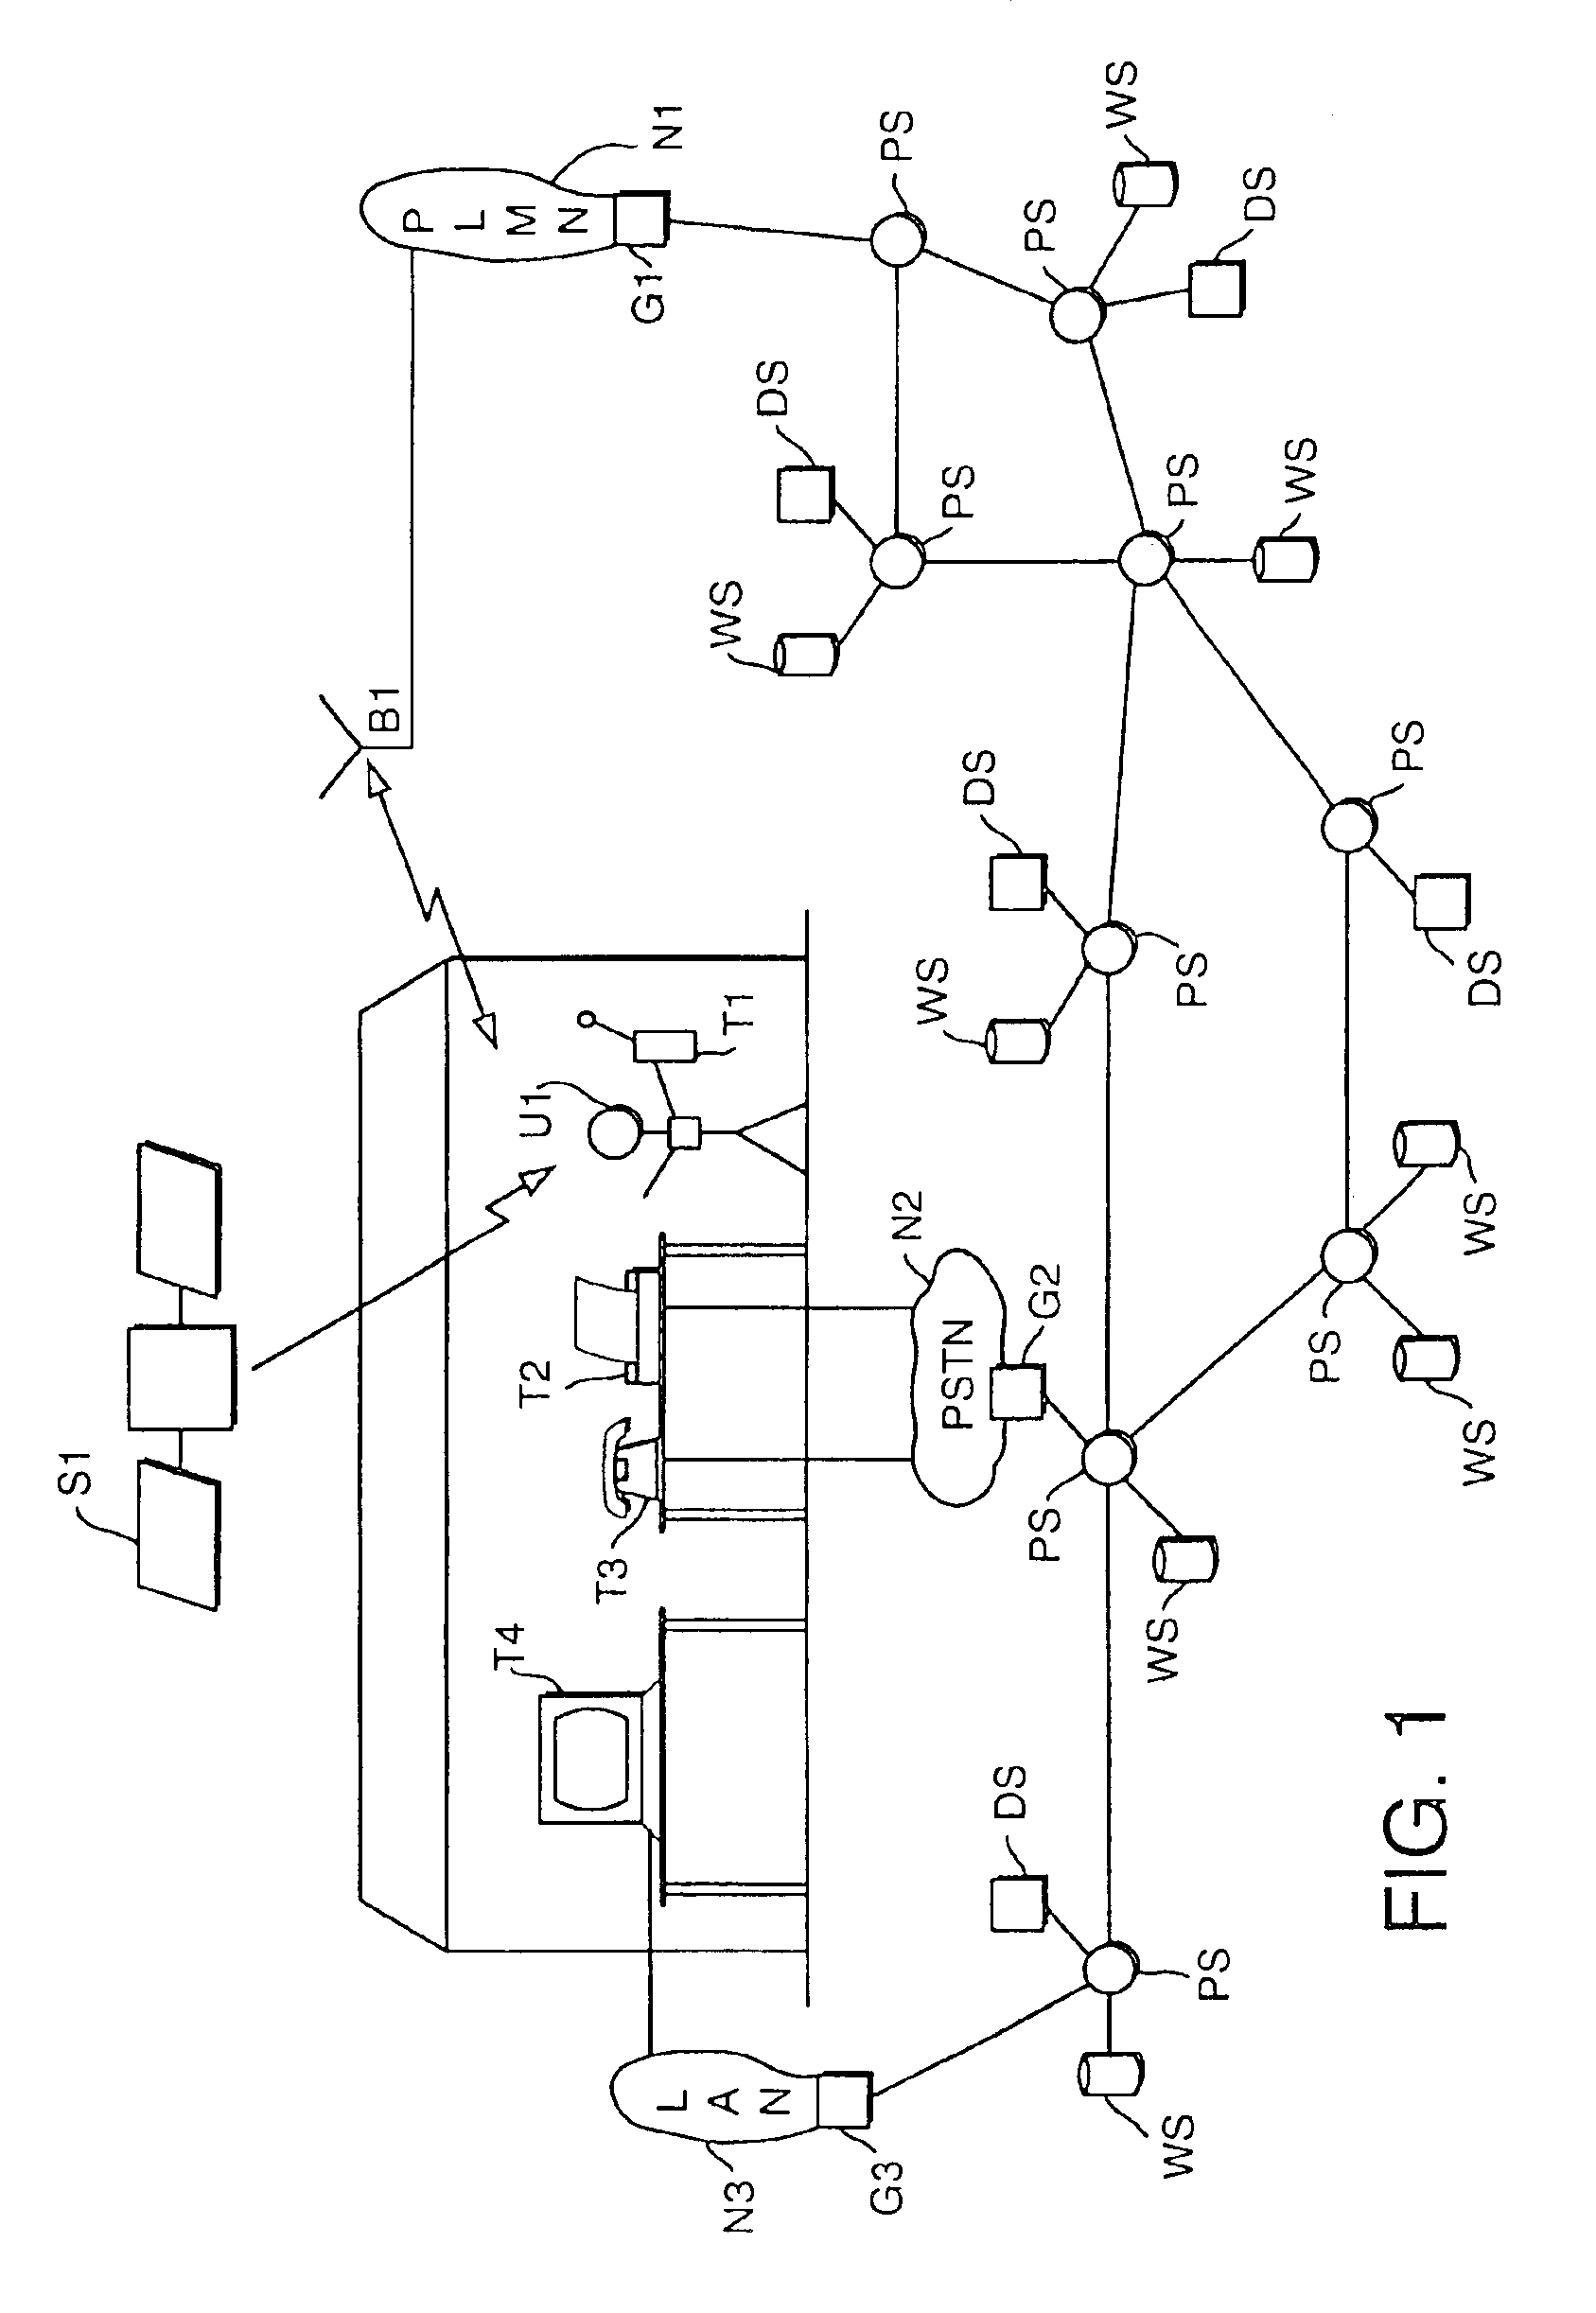 Storage and retrieval of location based information in a distributed network of data storage devices